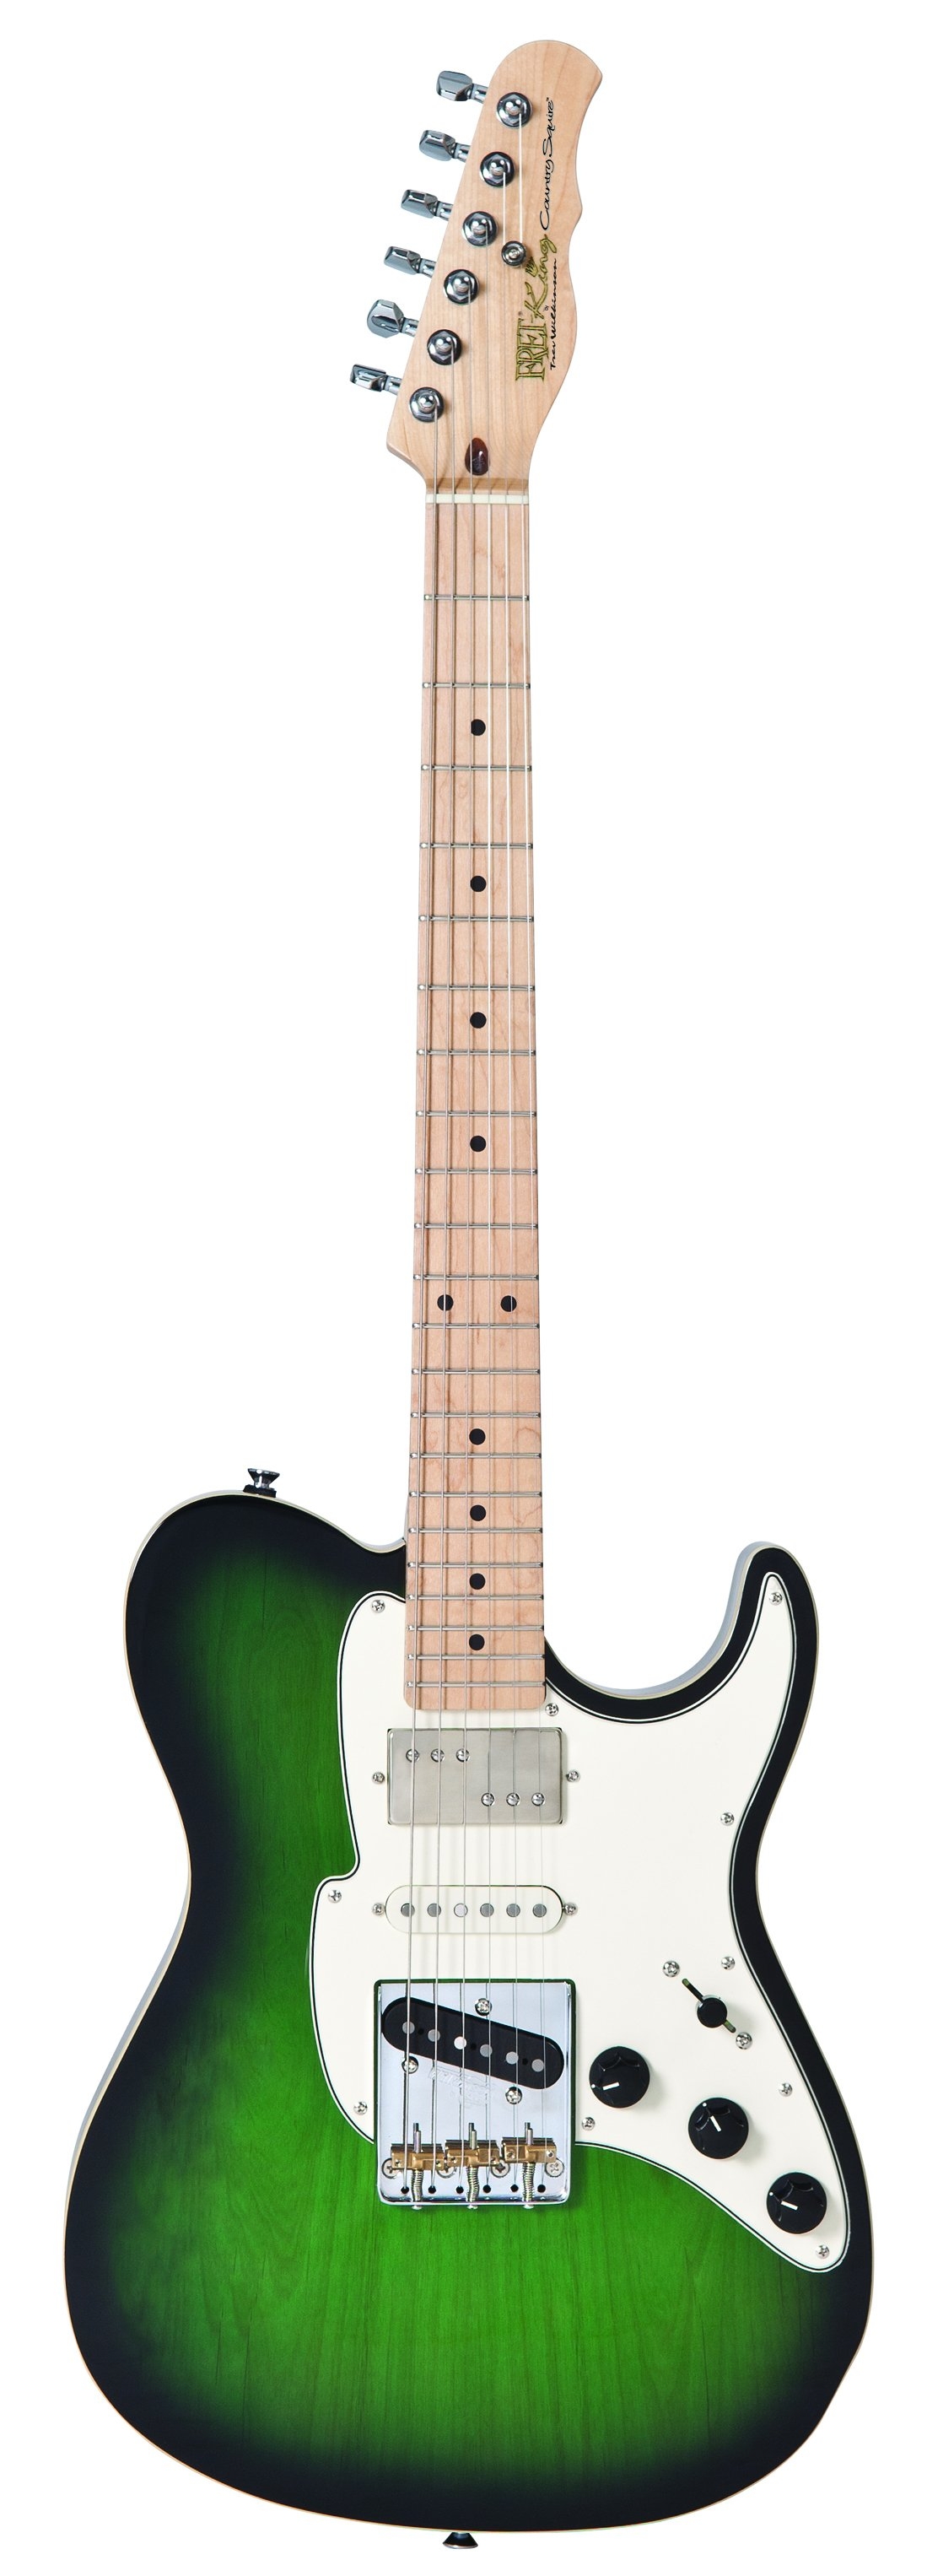 Limited Edition 1 of 6 – Fret-King Country Squier Special Electric Guitar – Ash Green Burst